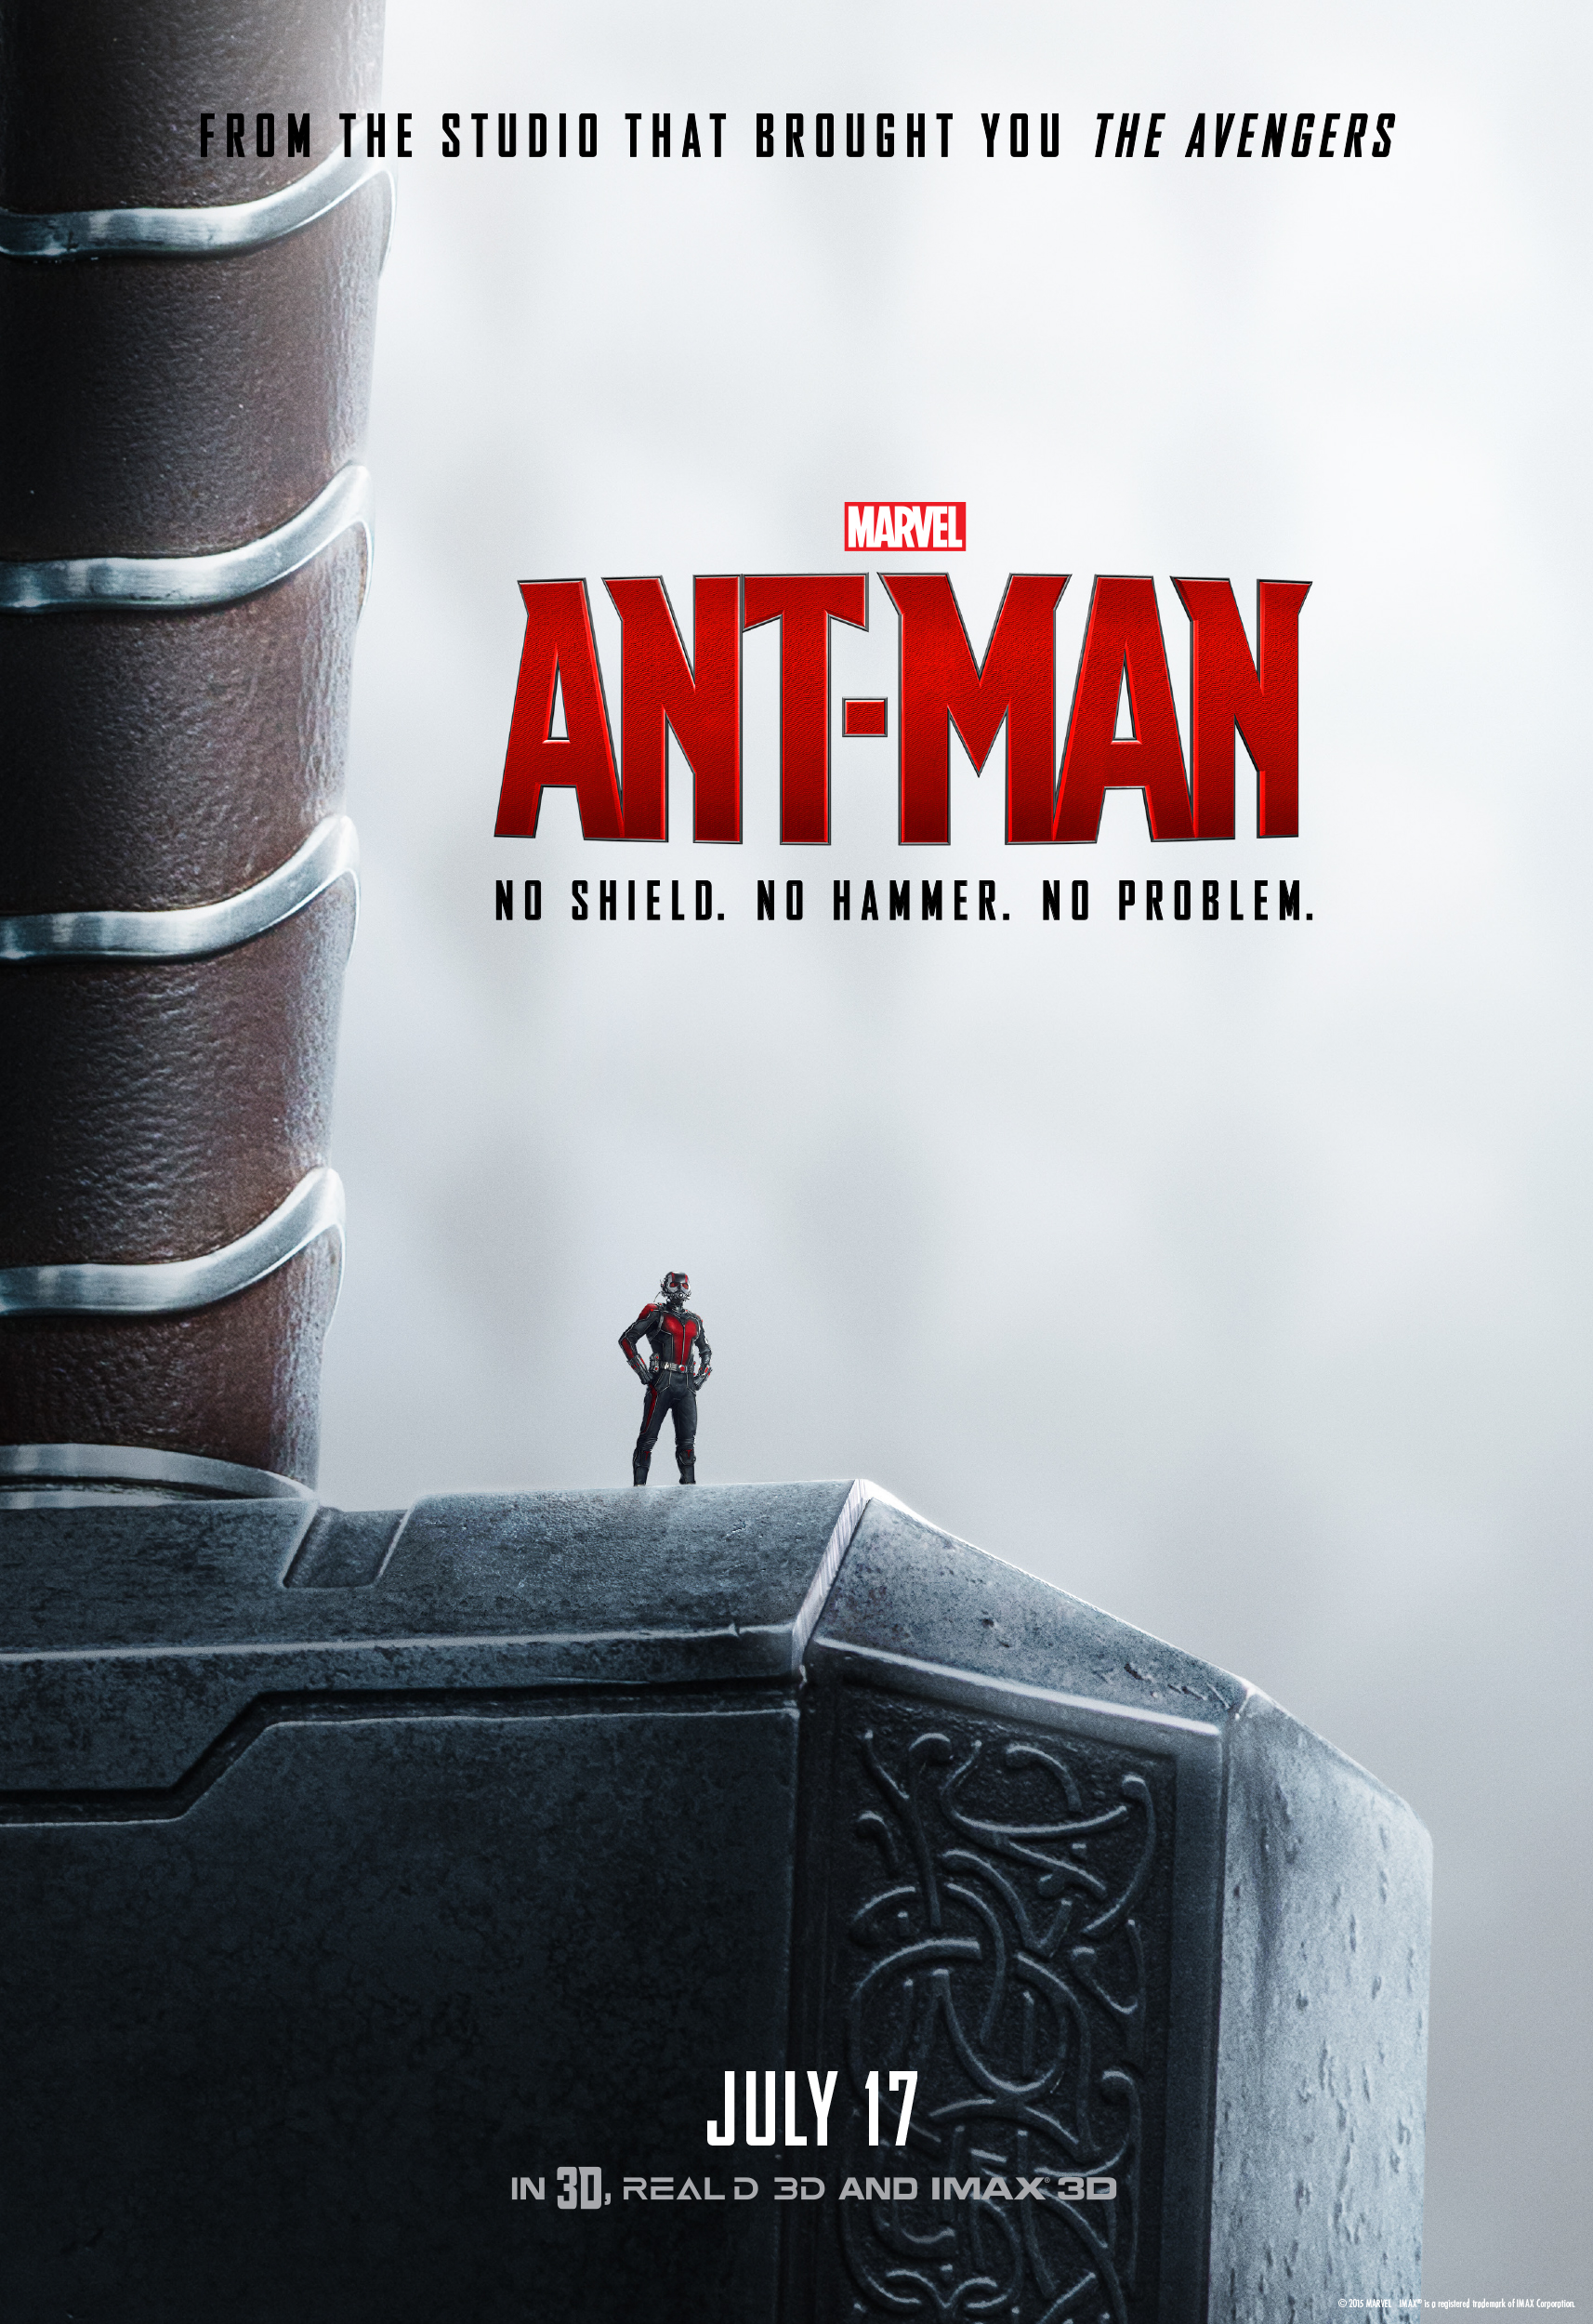 Marvel Releases Three New Posters for Upcoming Film “Ant-Man”